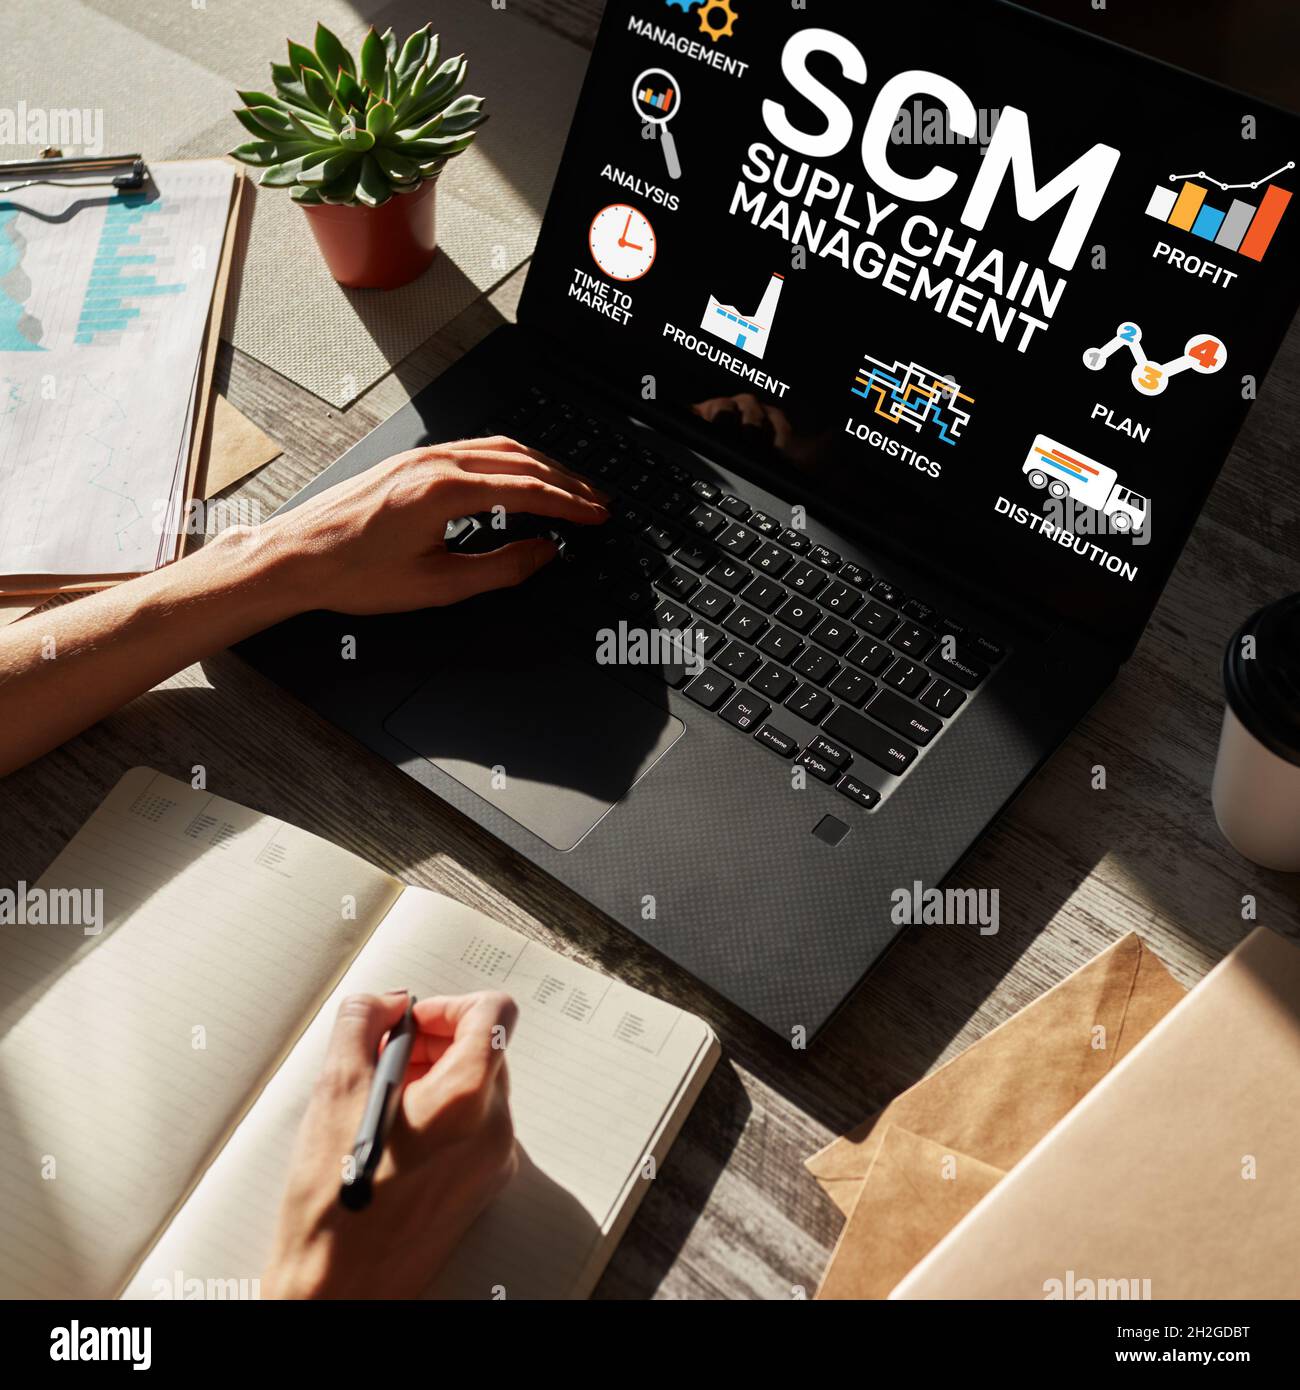 SCM - Supply Chain Management and business strategy concept on the screen. Stock Photo